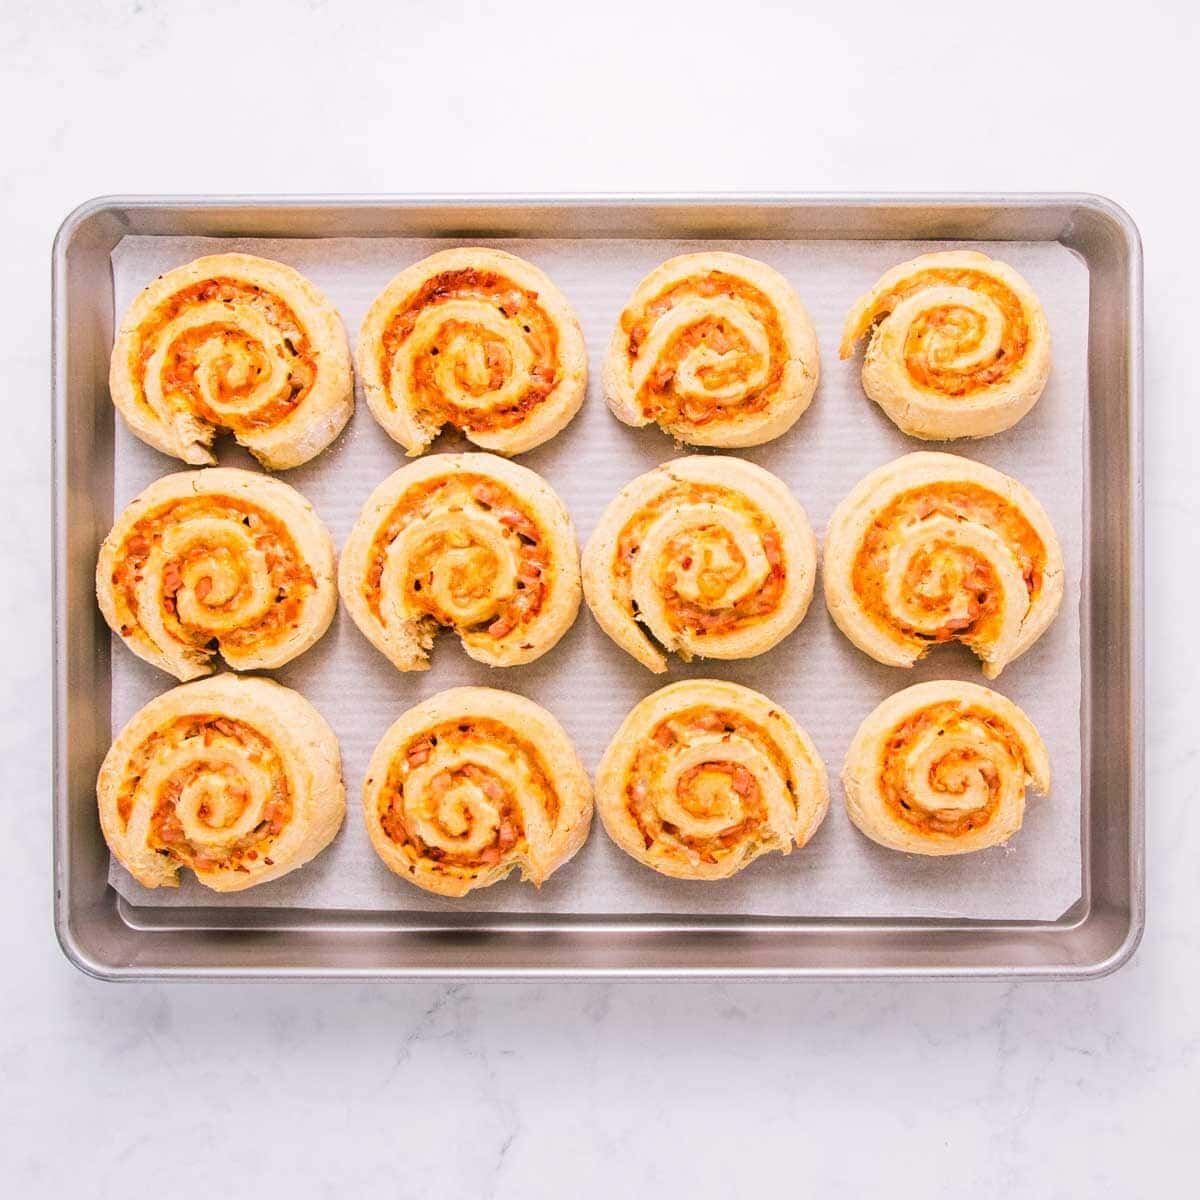 The baked scrolls on a baking tray. 